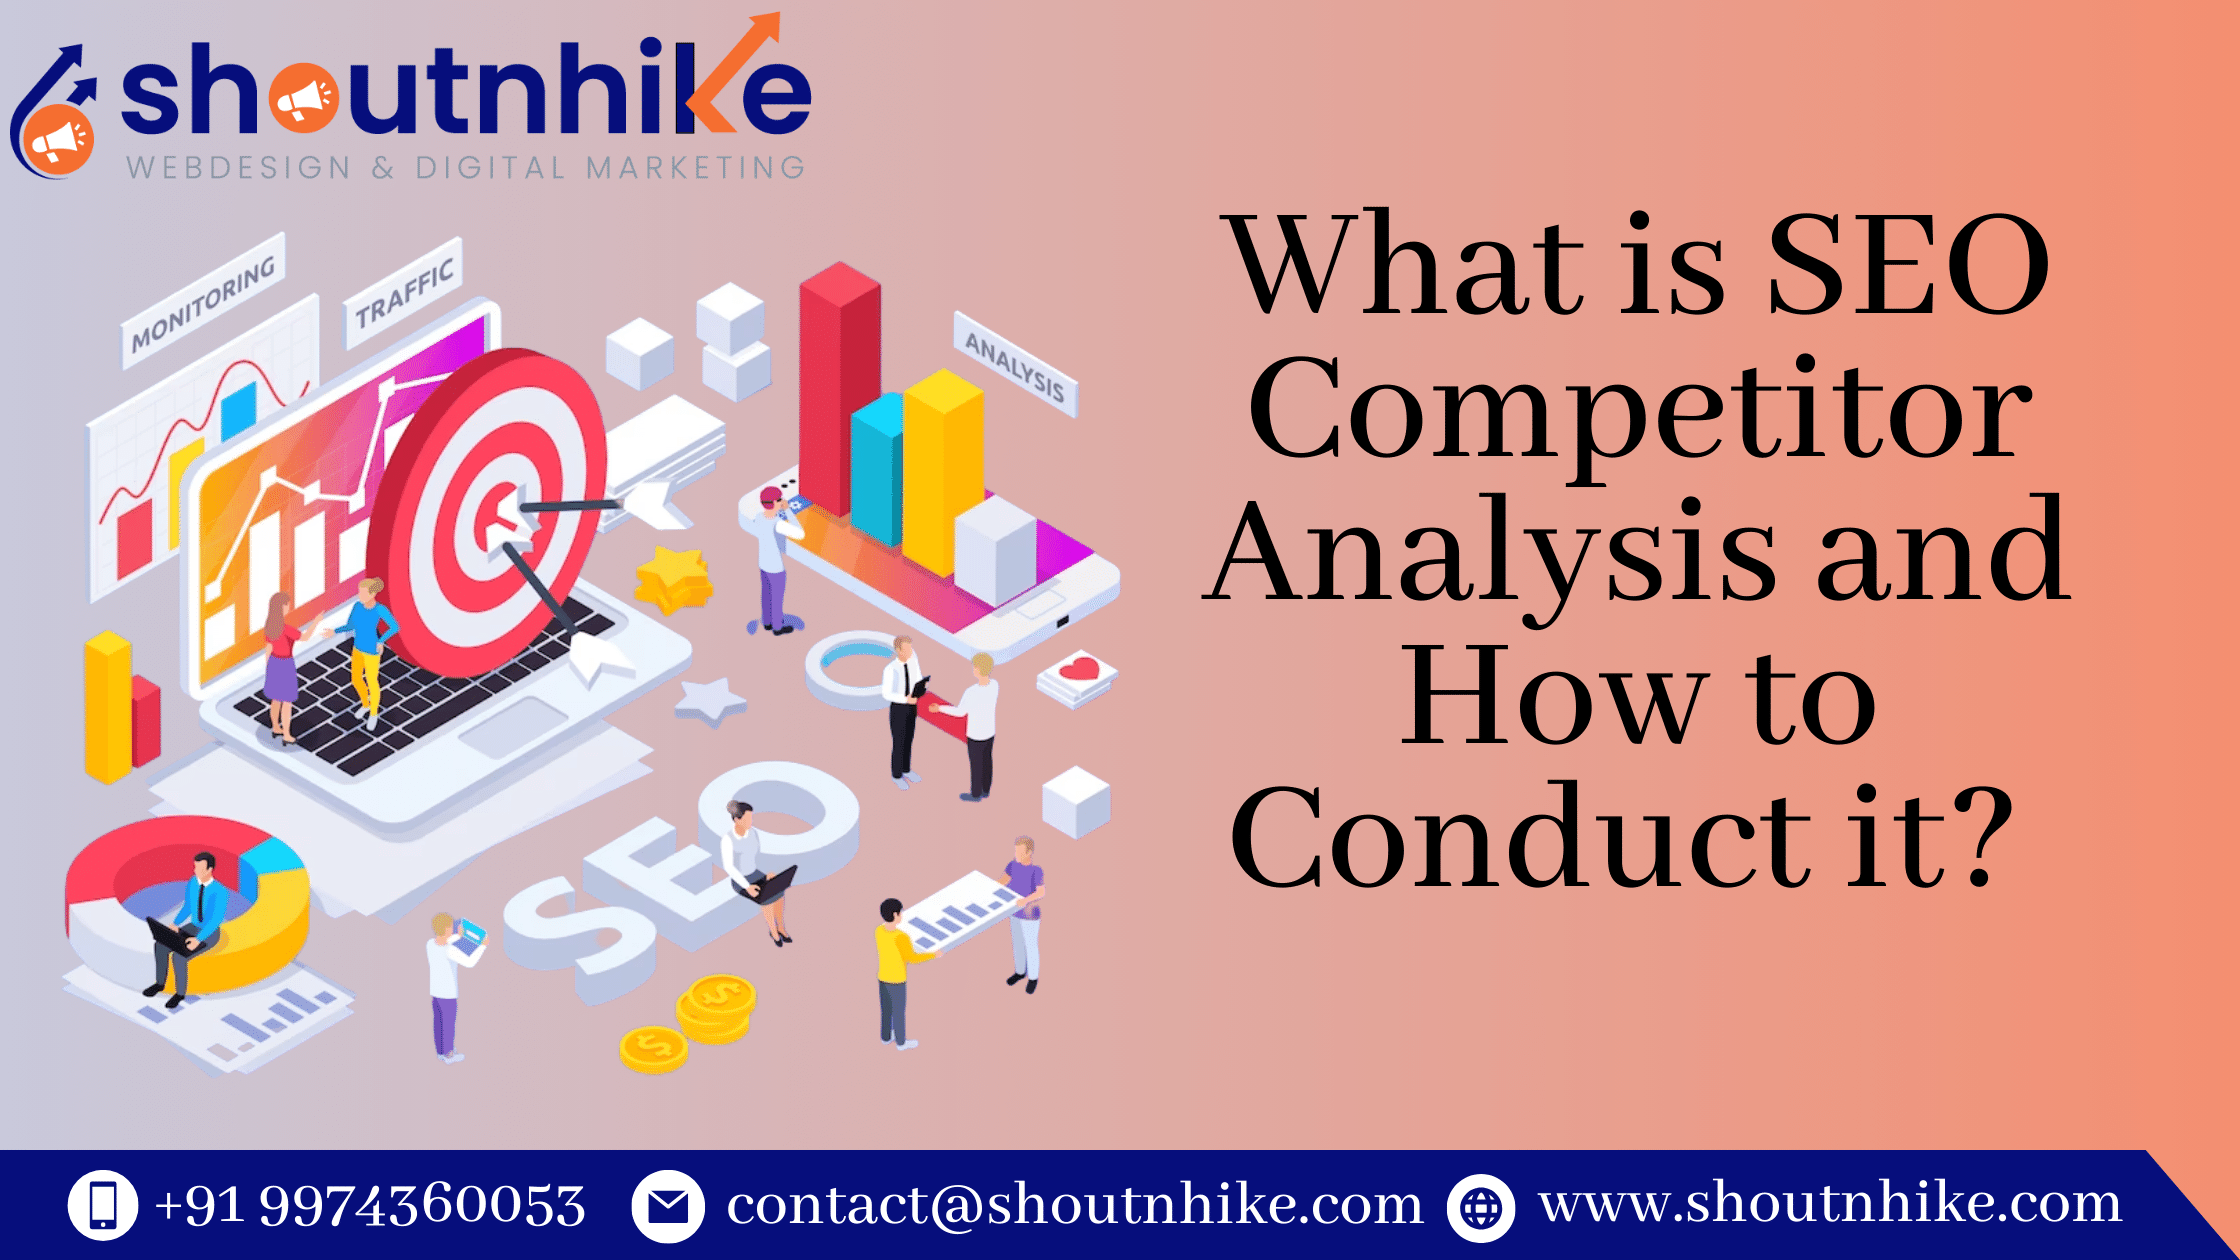 What is SEO Competitor Analysis and How to Conduct it?